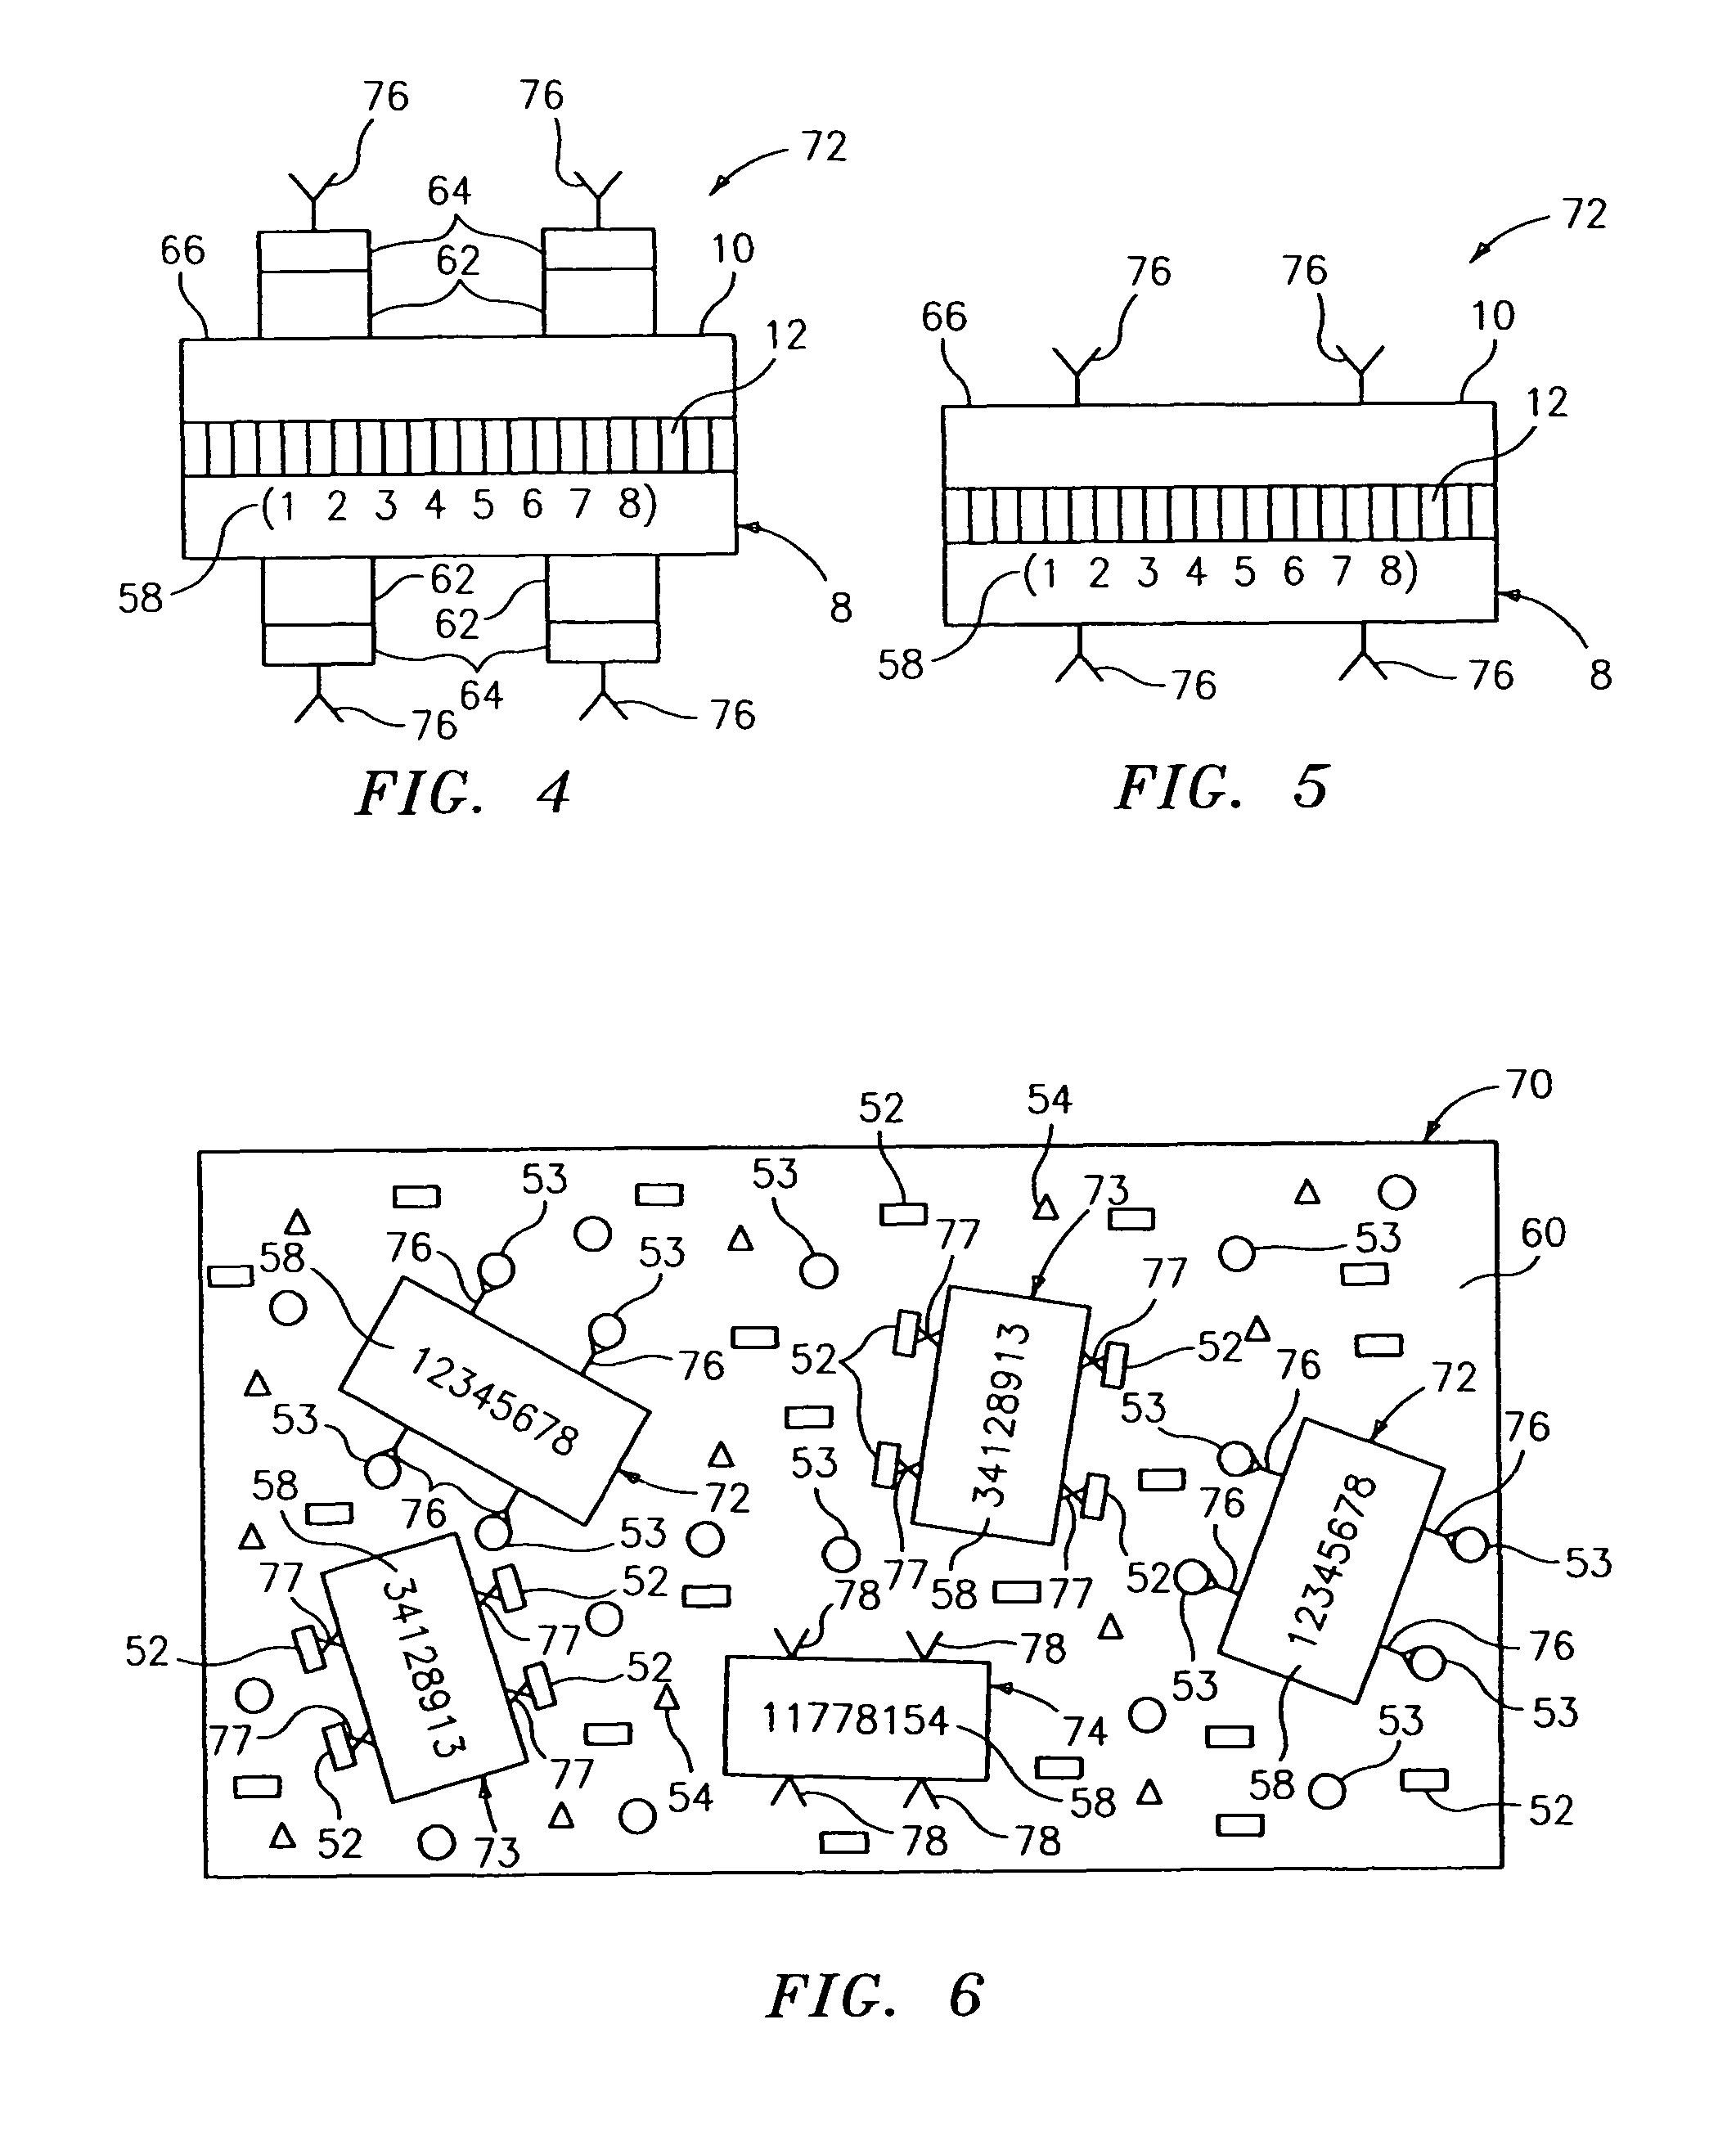 Encoded particle having a grating with variations in the refractive index